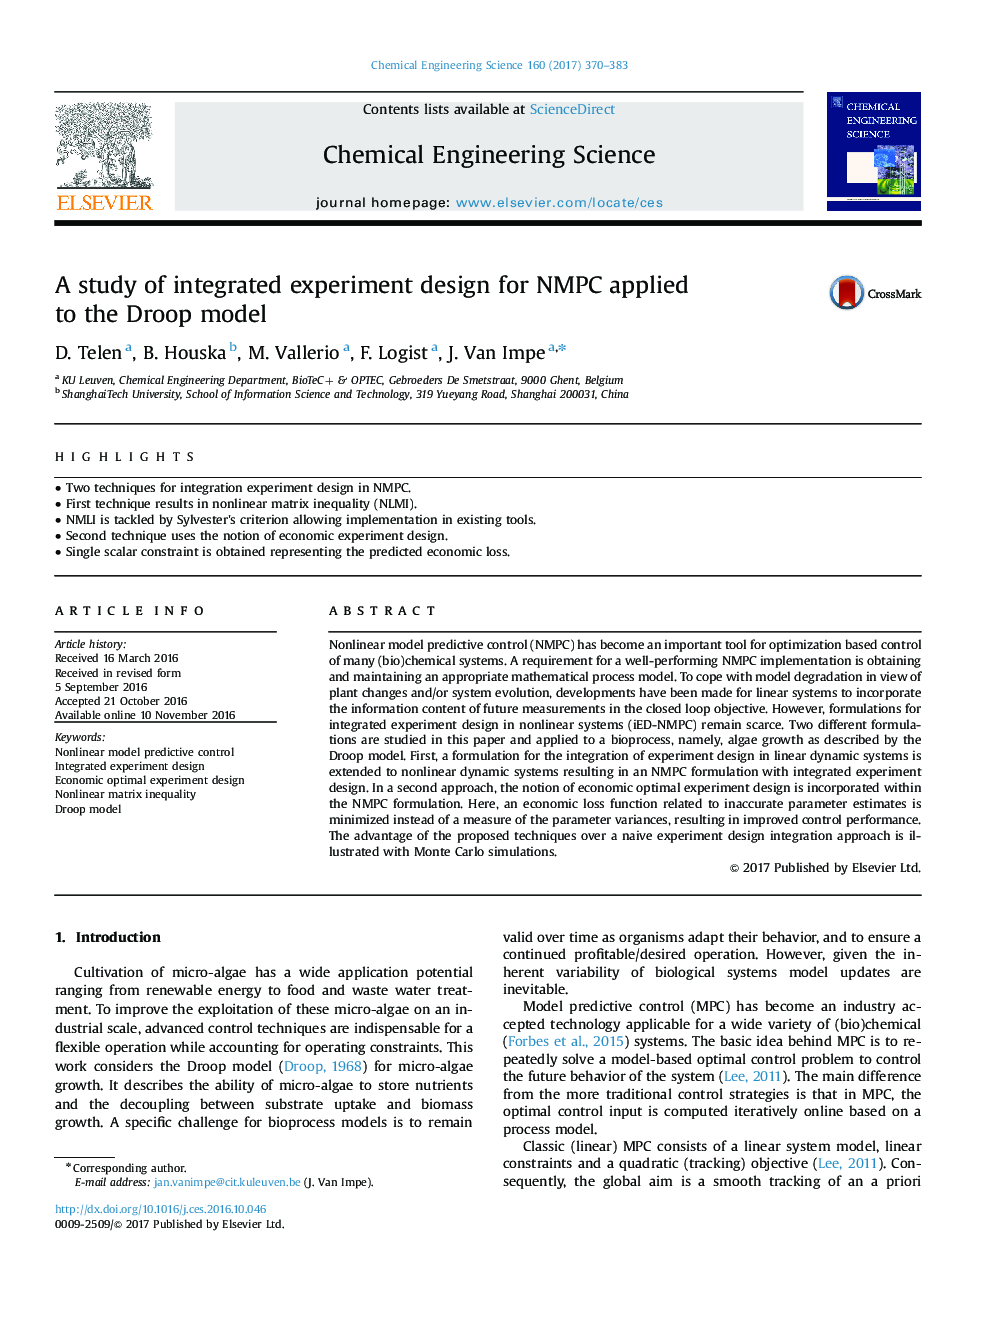 A study of integrated experiment design for NMPC applied to the Droop model